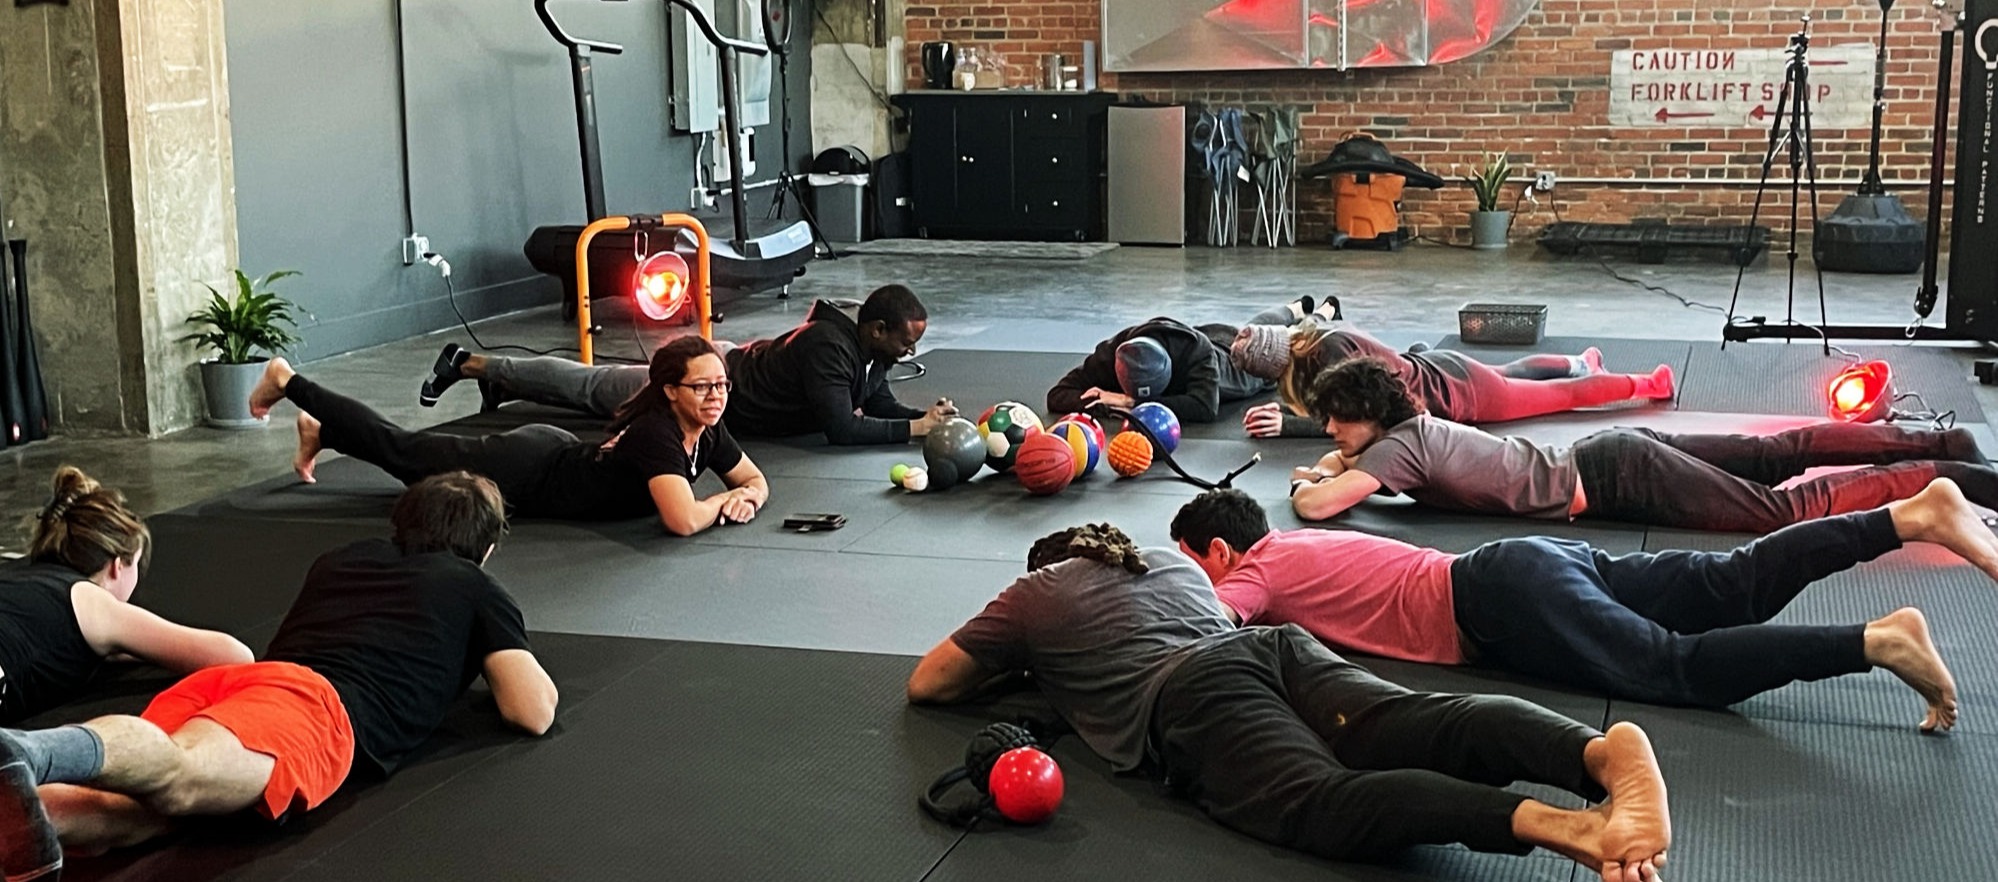 Chronic pain relief, biomechanics training, strength and conditioning | Chattanooga, Huntsville, Knoxville, Ooltewah, Cleveland, Nashville, Memphis